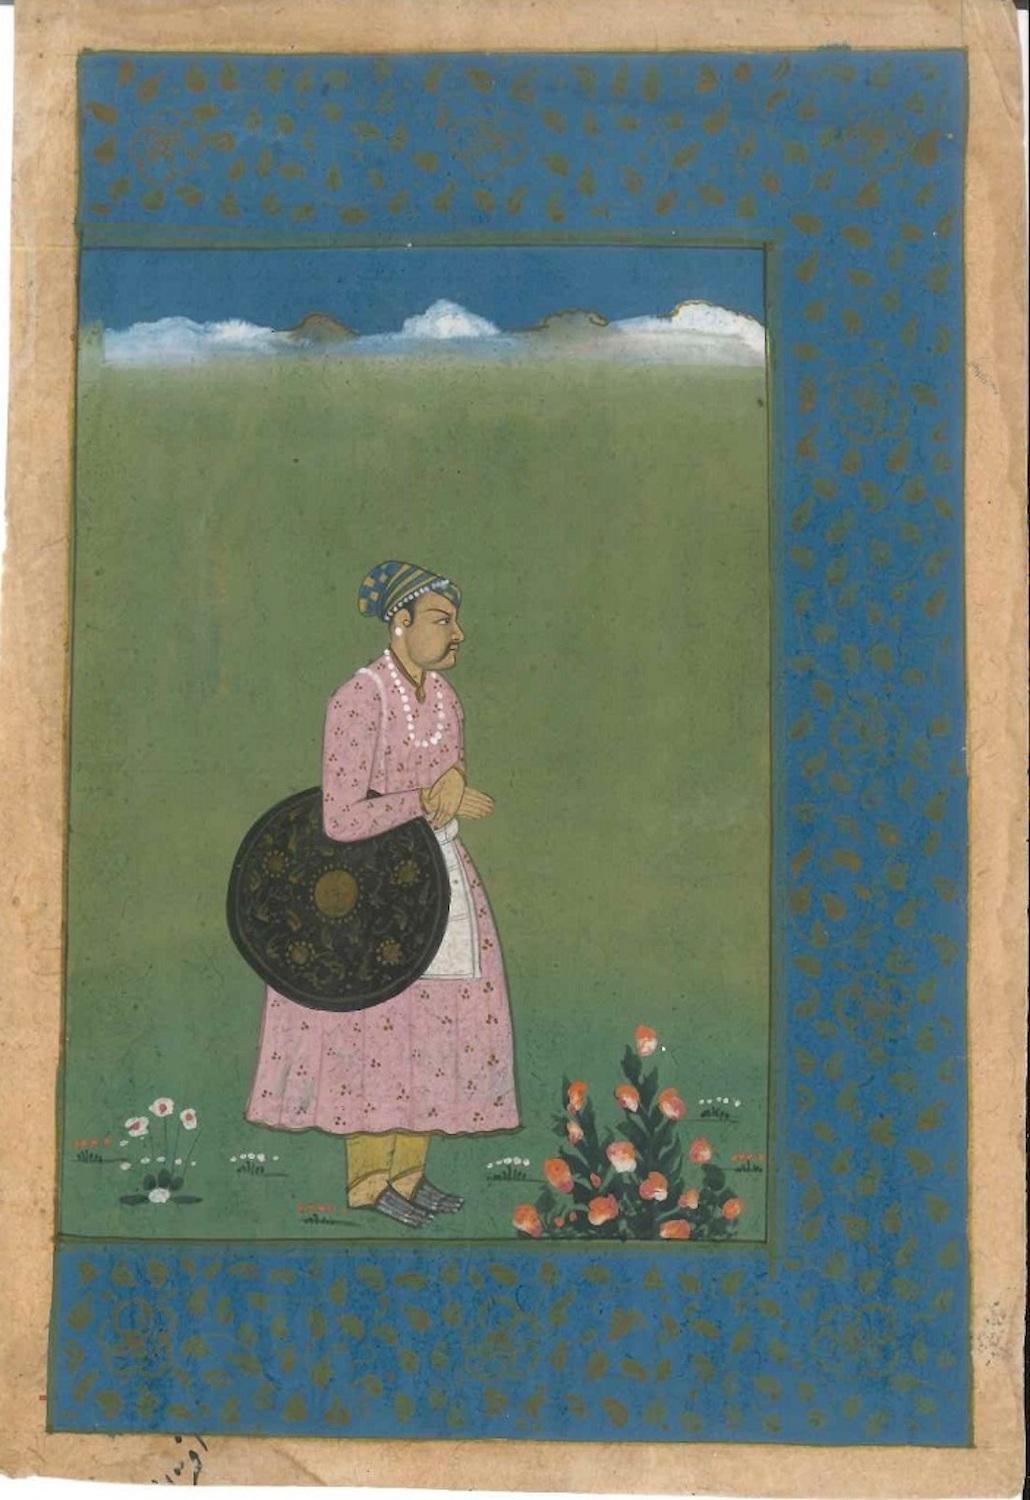 Unknown Figurative Art - Ancient Persian Miniature: The Beauty of Youth - Probably 18/19th Century